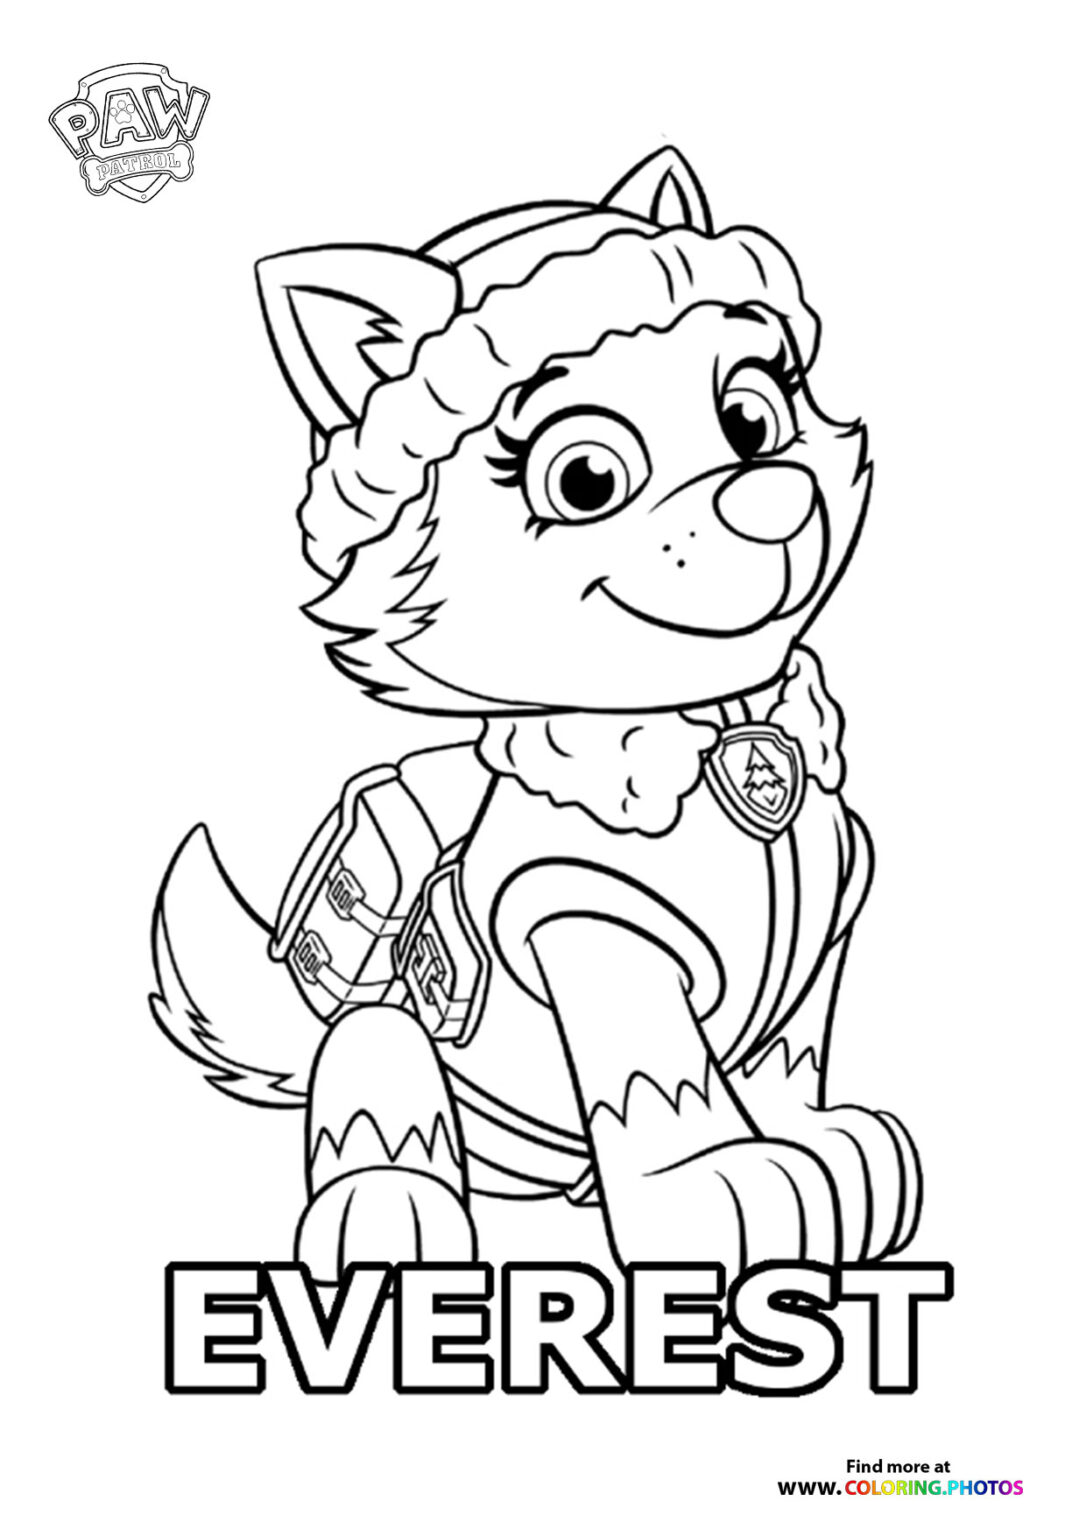 Paw Patrol Coloring Pages FREE Printable 68